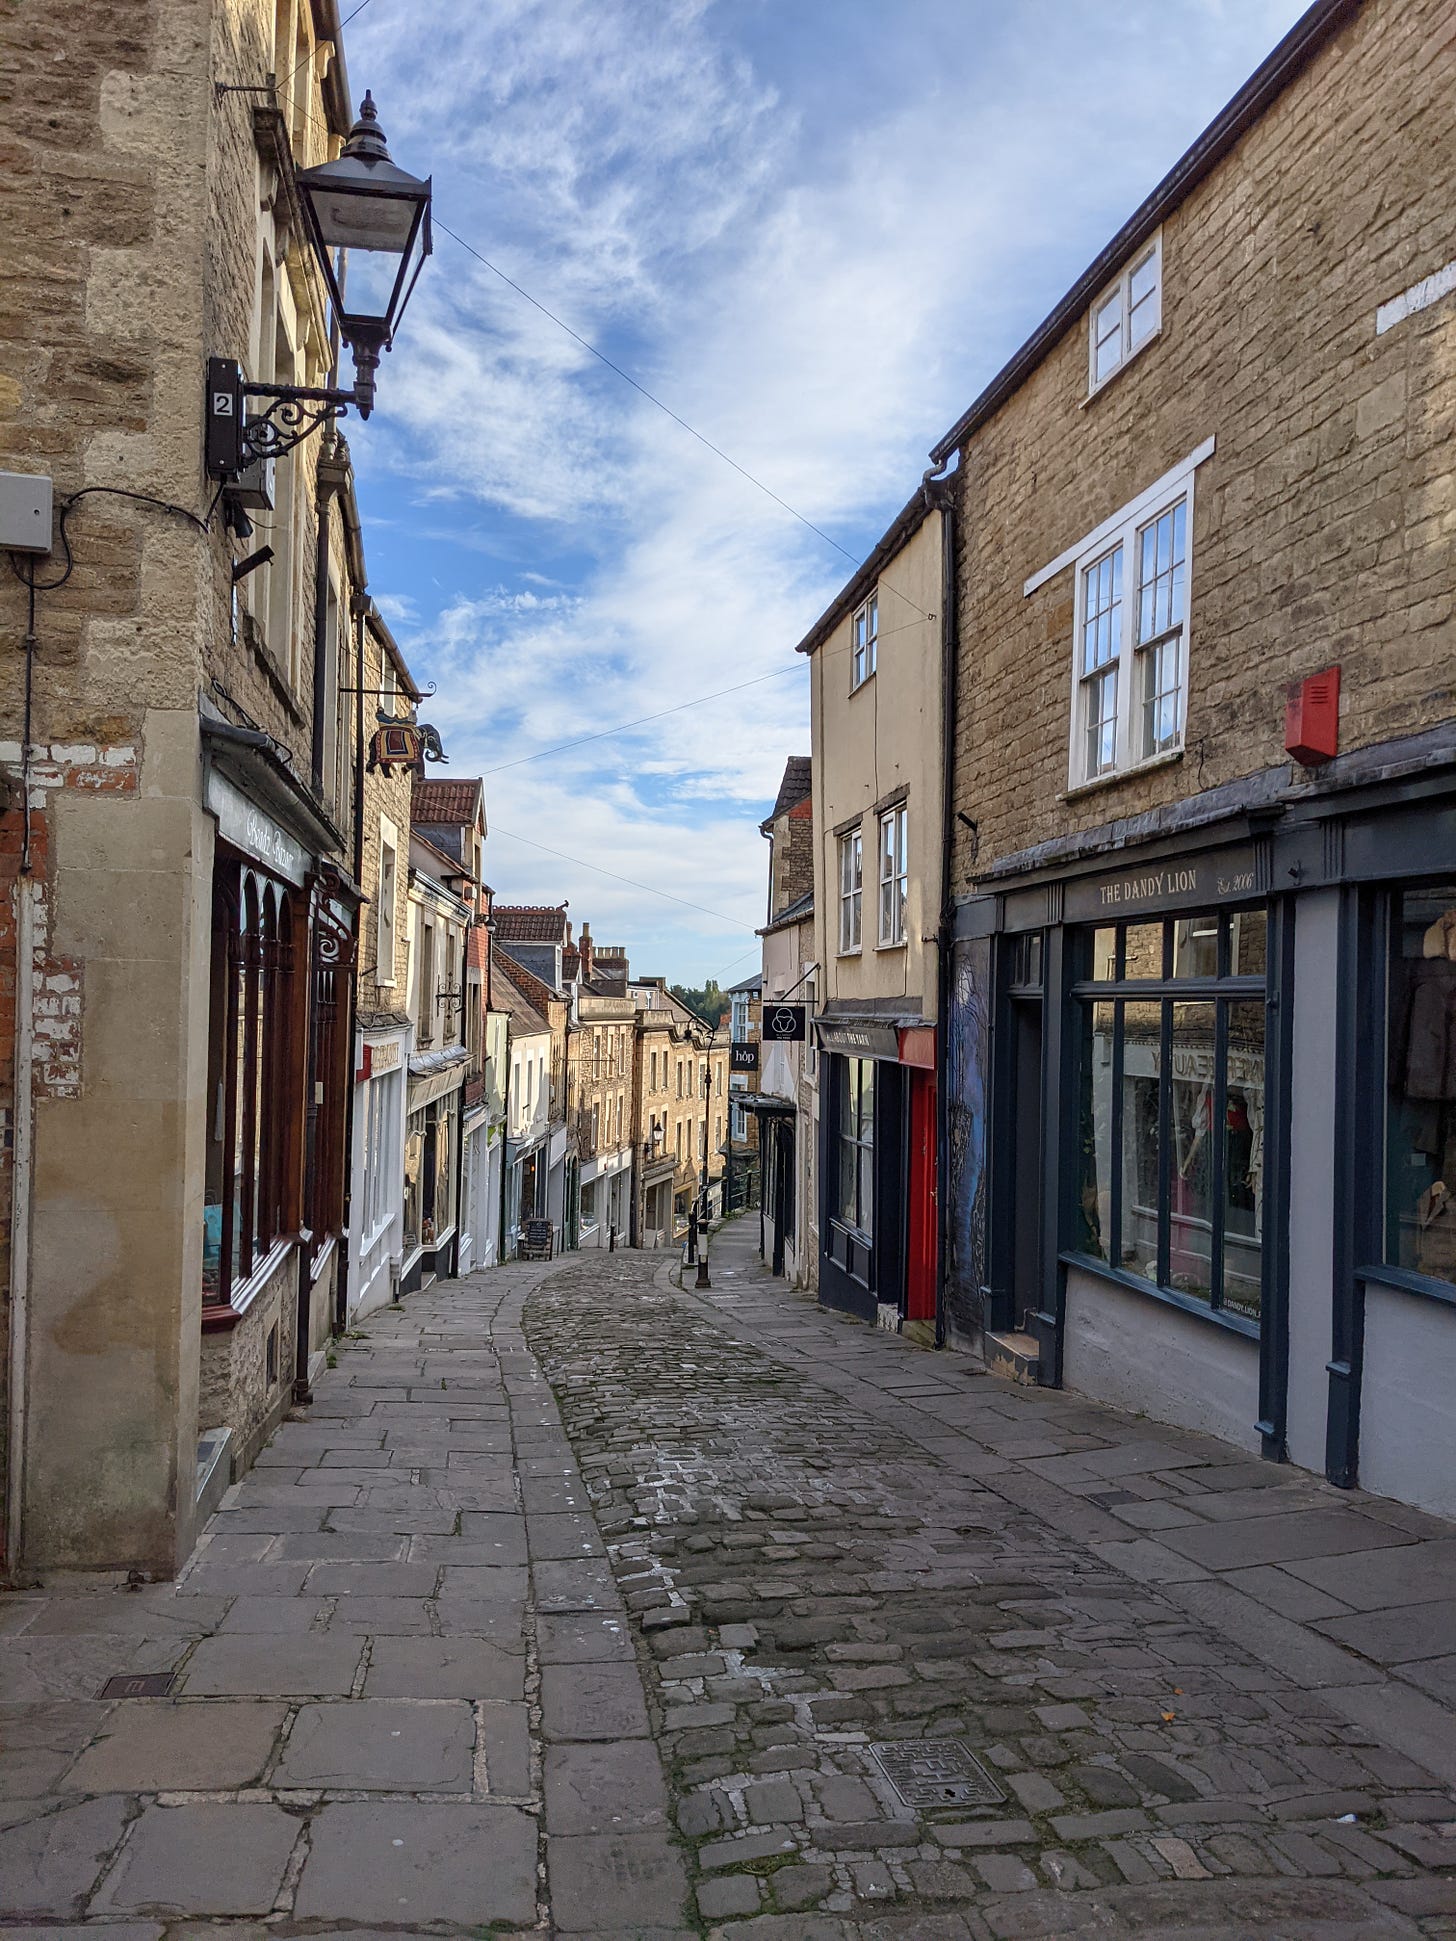 A view down Catherine Hill, a cobbled street lined with shops, in Frome, Somerset